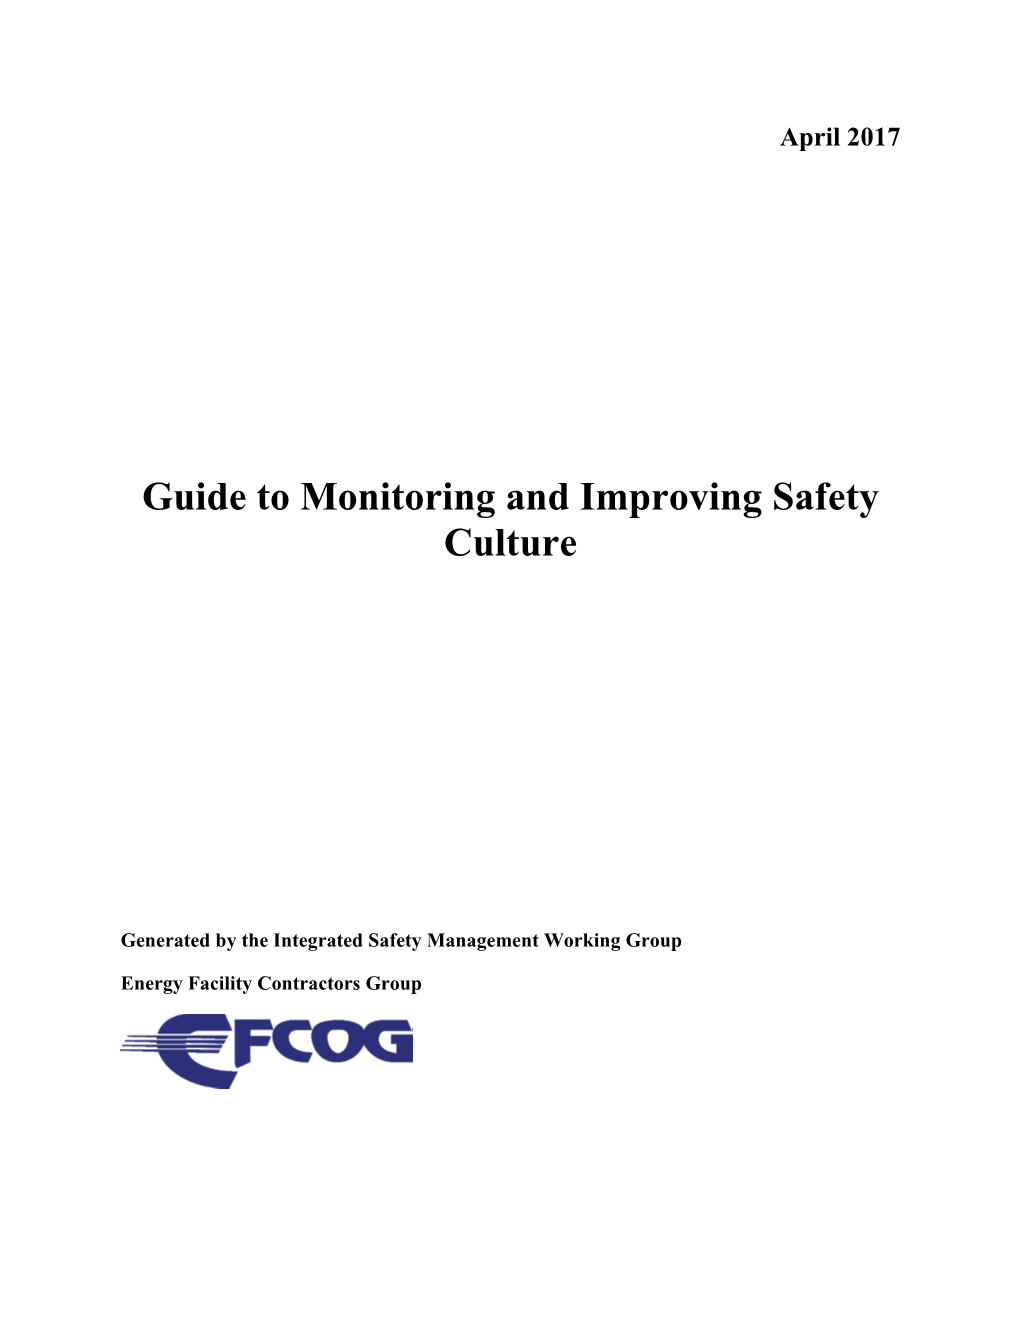 Guide to Monitoring and Improving Safety Culture